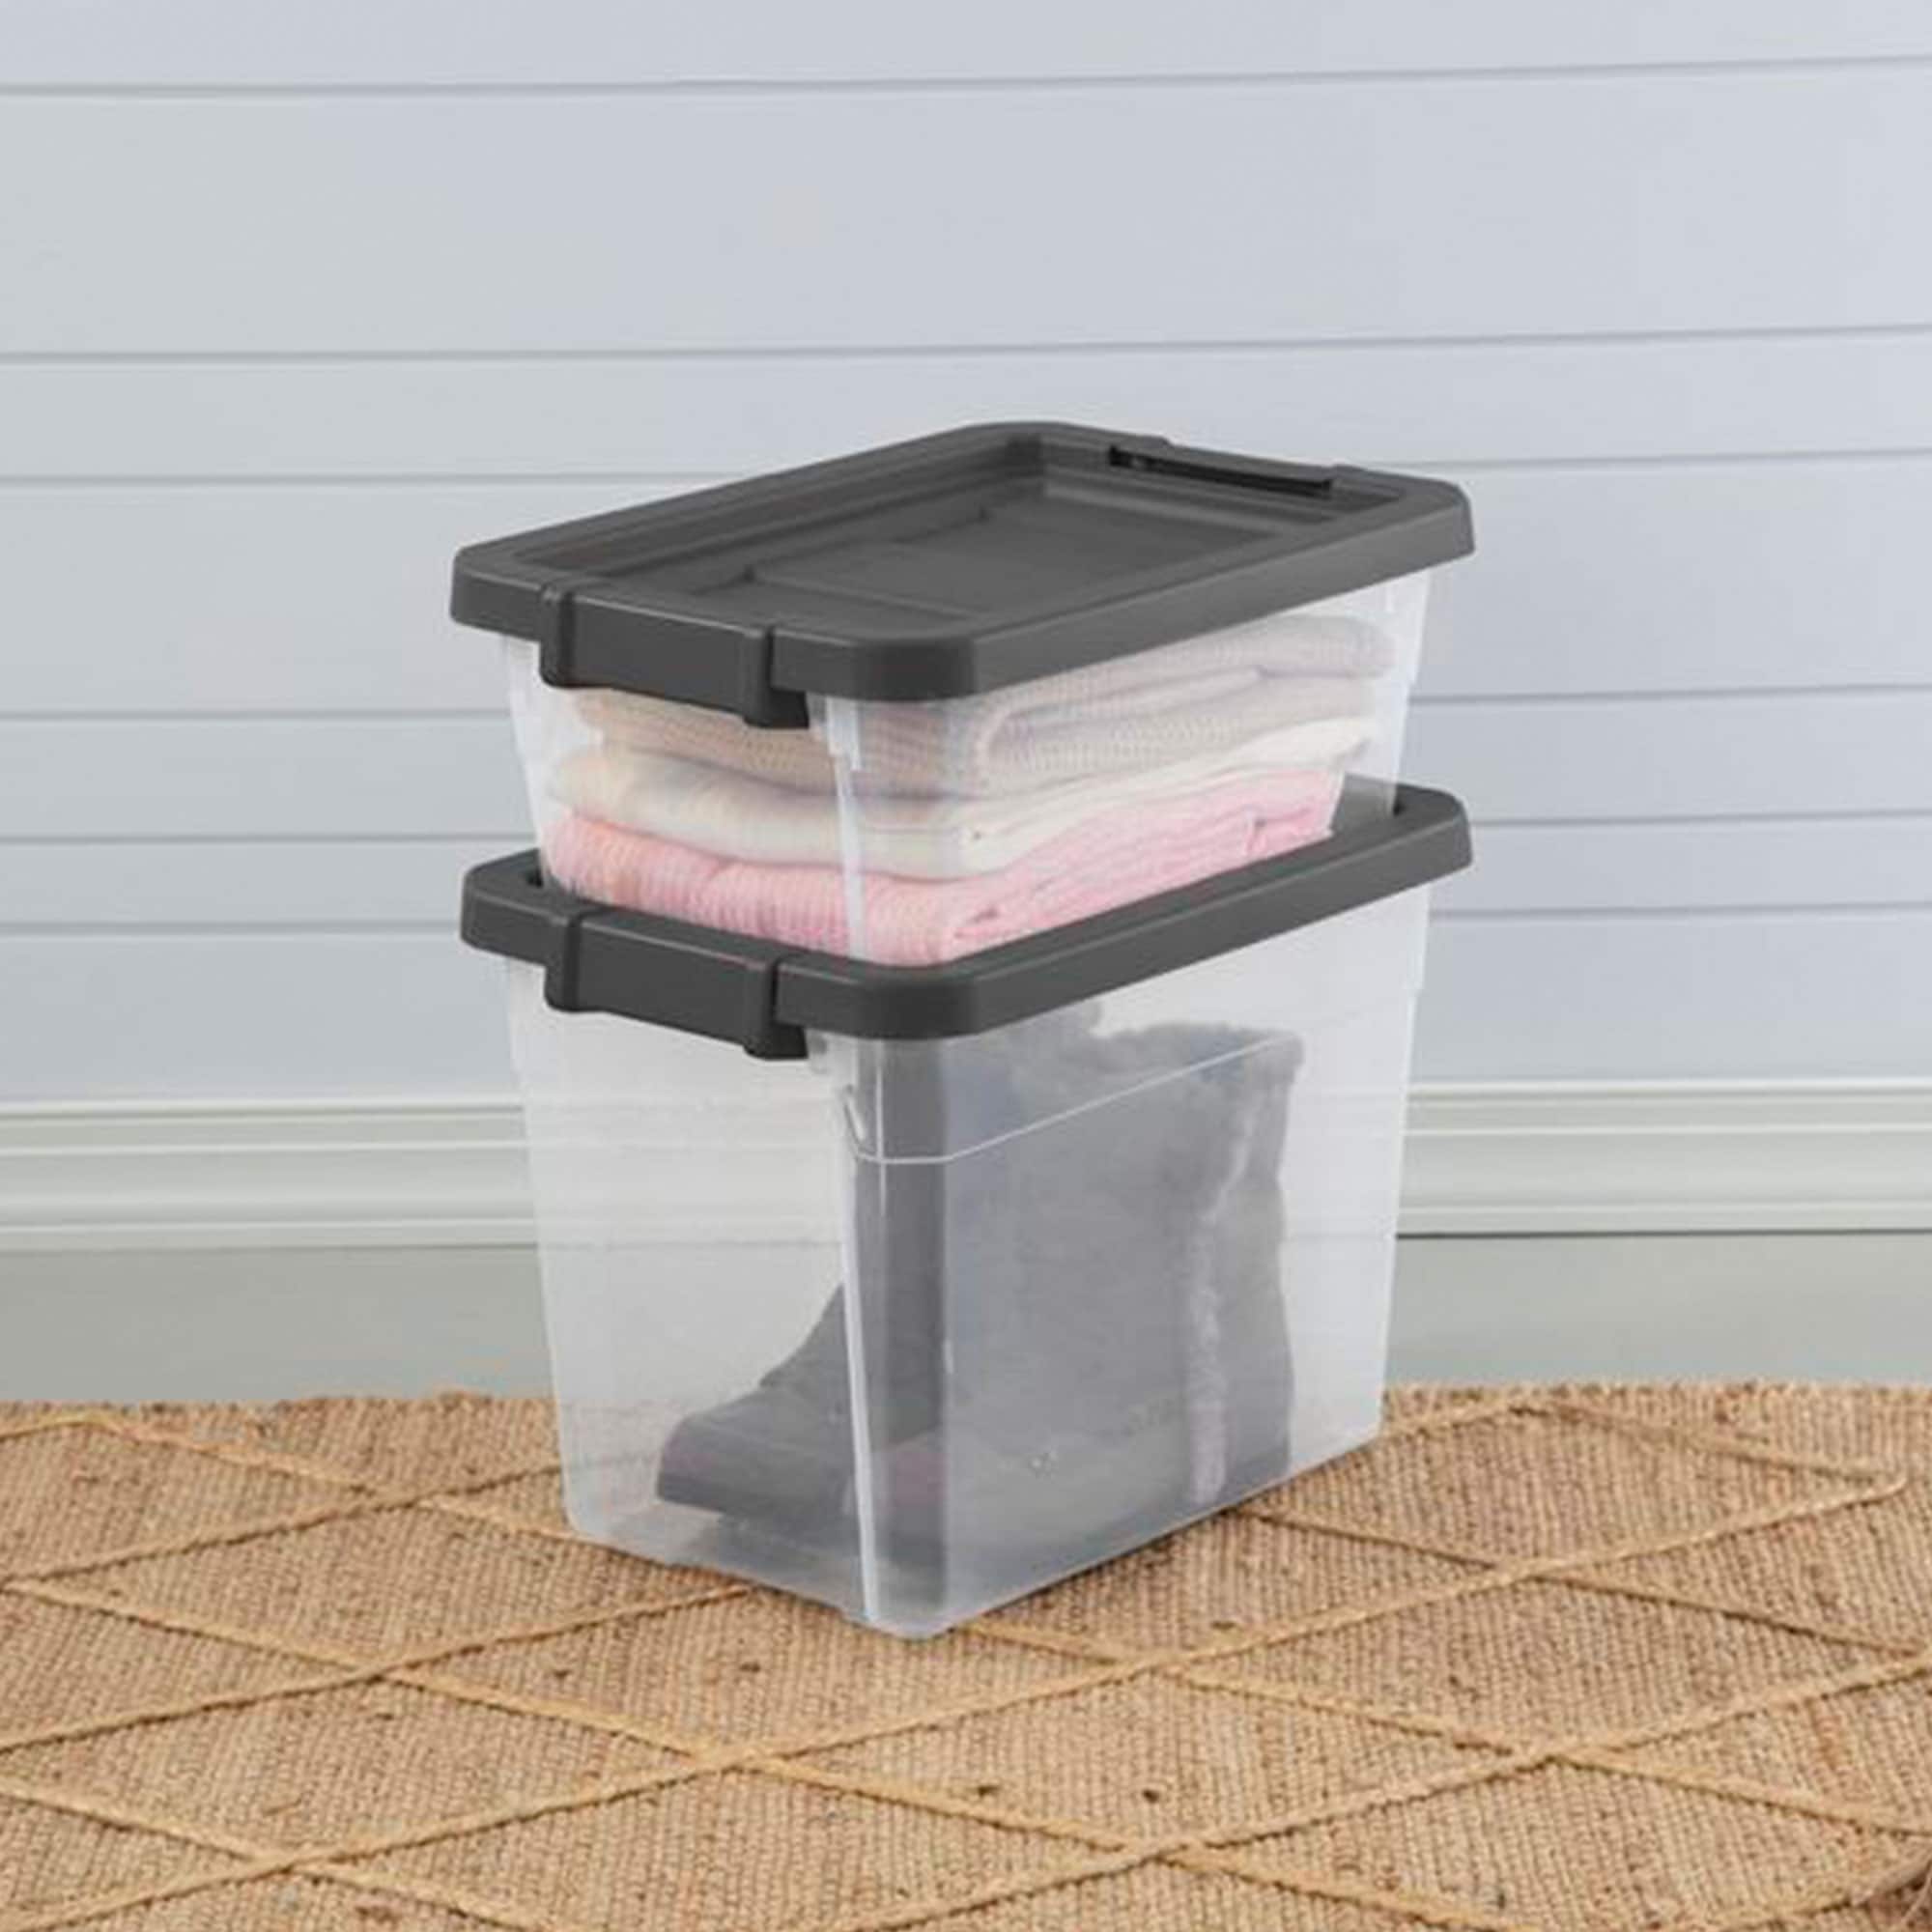 https://ak1.ostkcdn.com/images/products/is/images/direct/f3144553064d8a9c4ae381eab511e7ffa62ce8b4/Sterilite-30-Qt-Clear-Plastic-Stackable-Storage-Bin-with-Grey-Latch-Lid%2C-6-Pack.jpg